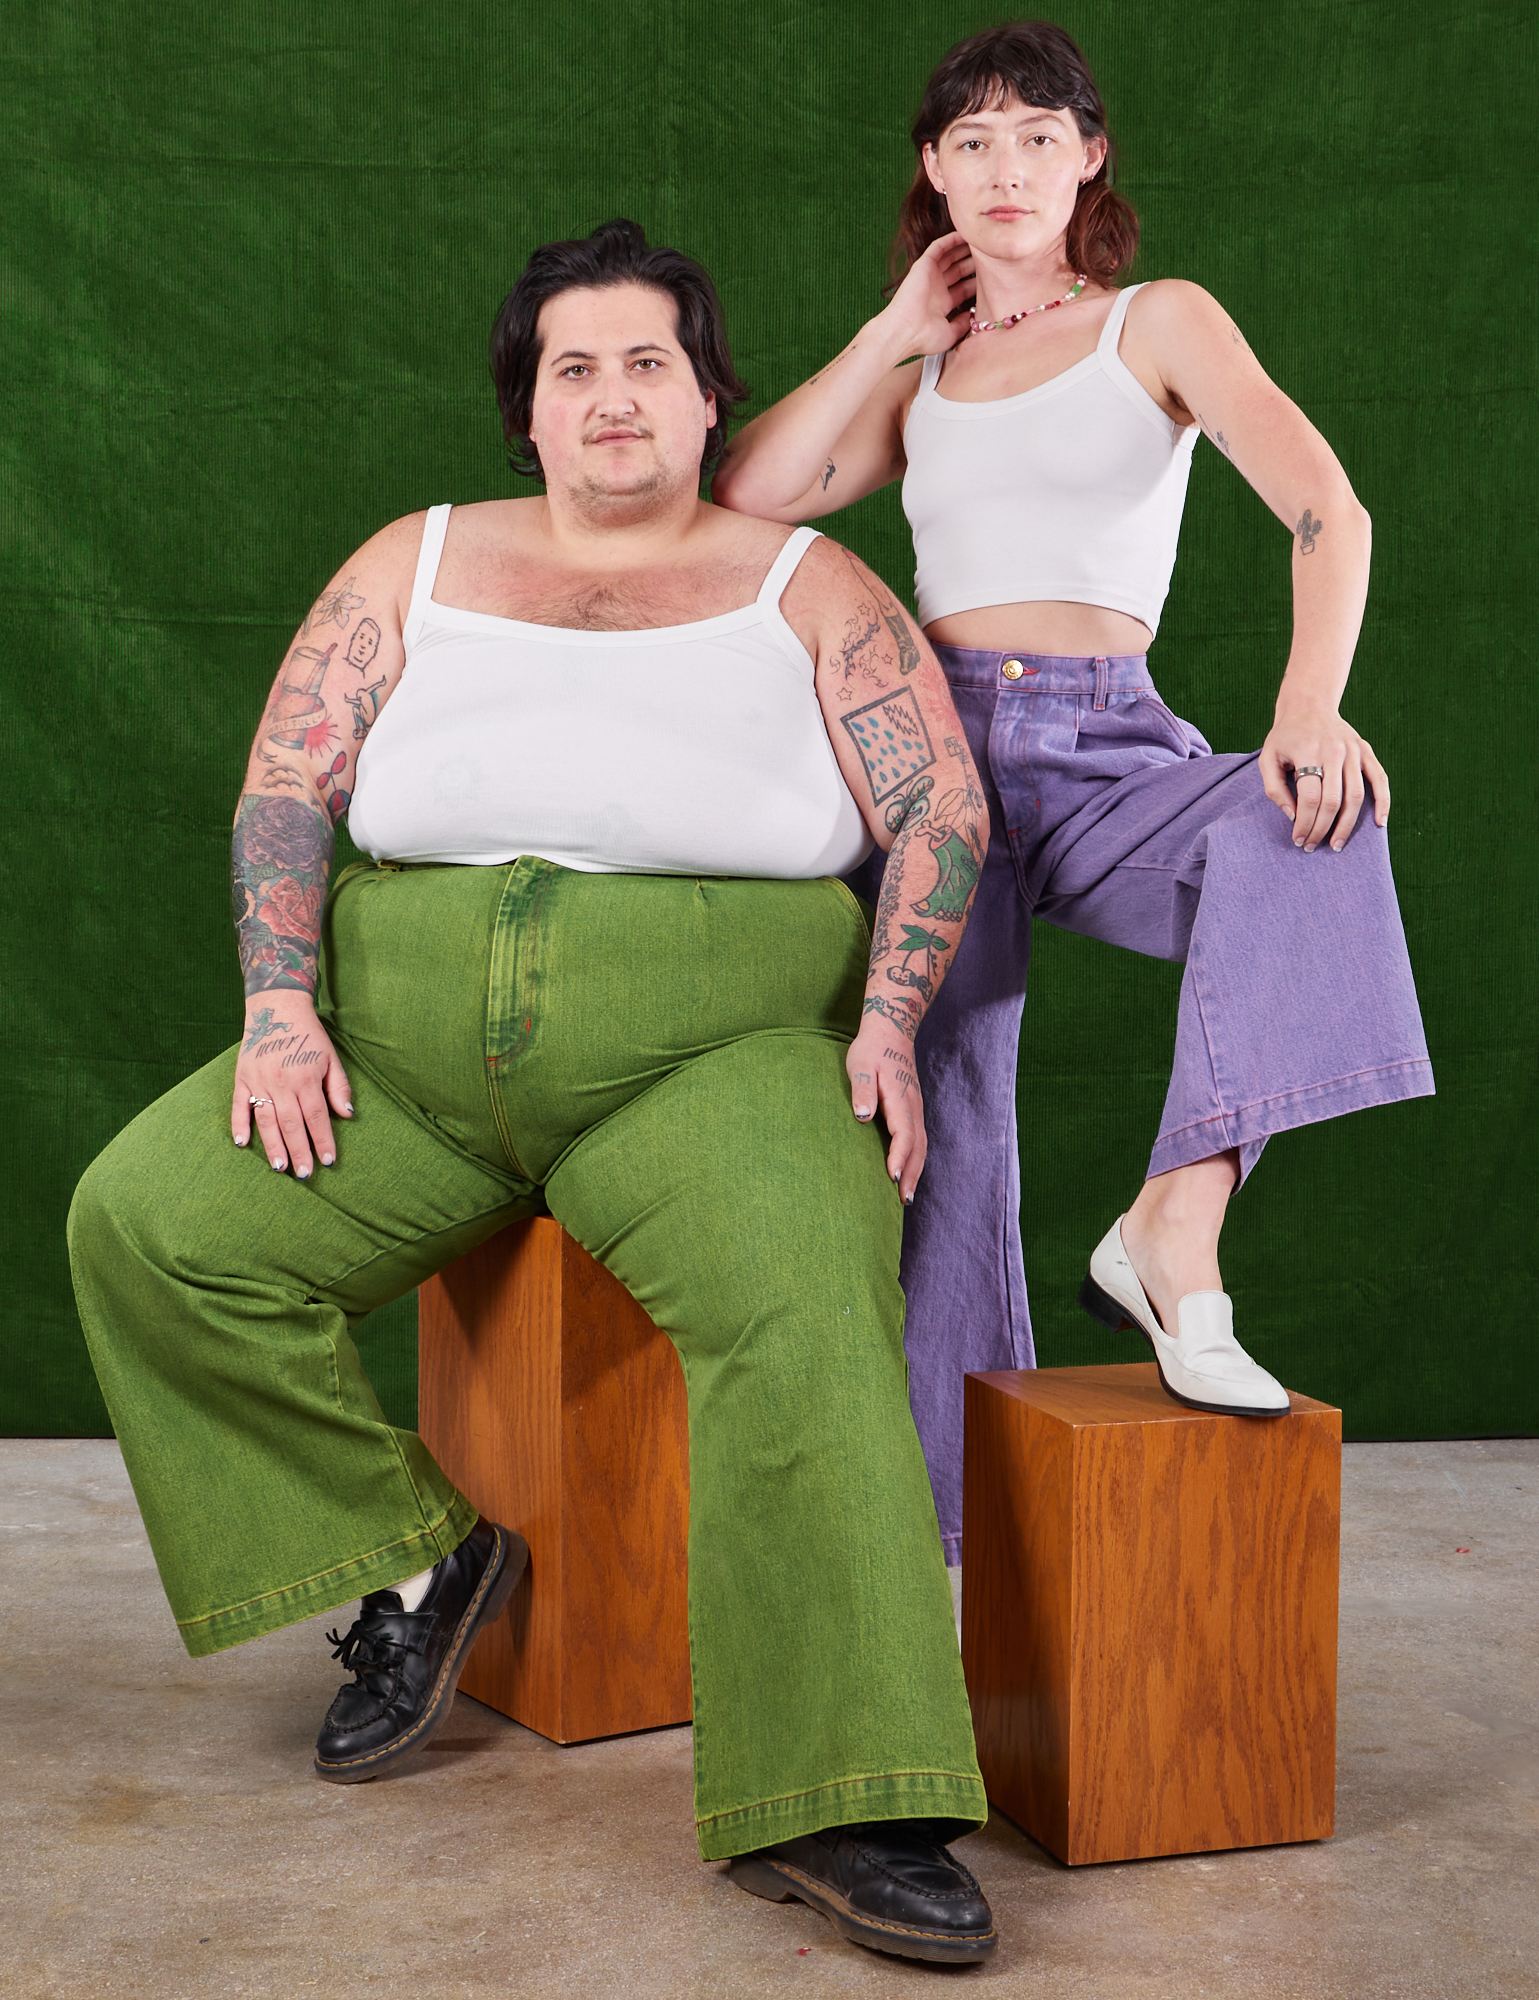 Sam is wearing Overdyed Wide Leg Trousers in Gross Green and Cropped Cami in vintage tee off-white. Alex is standing behind them wearing Overdyed Wide Leg Trousers in Faded Grape